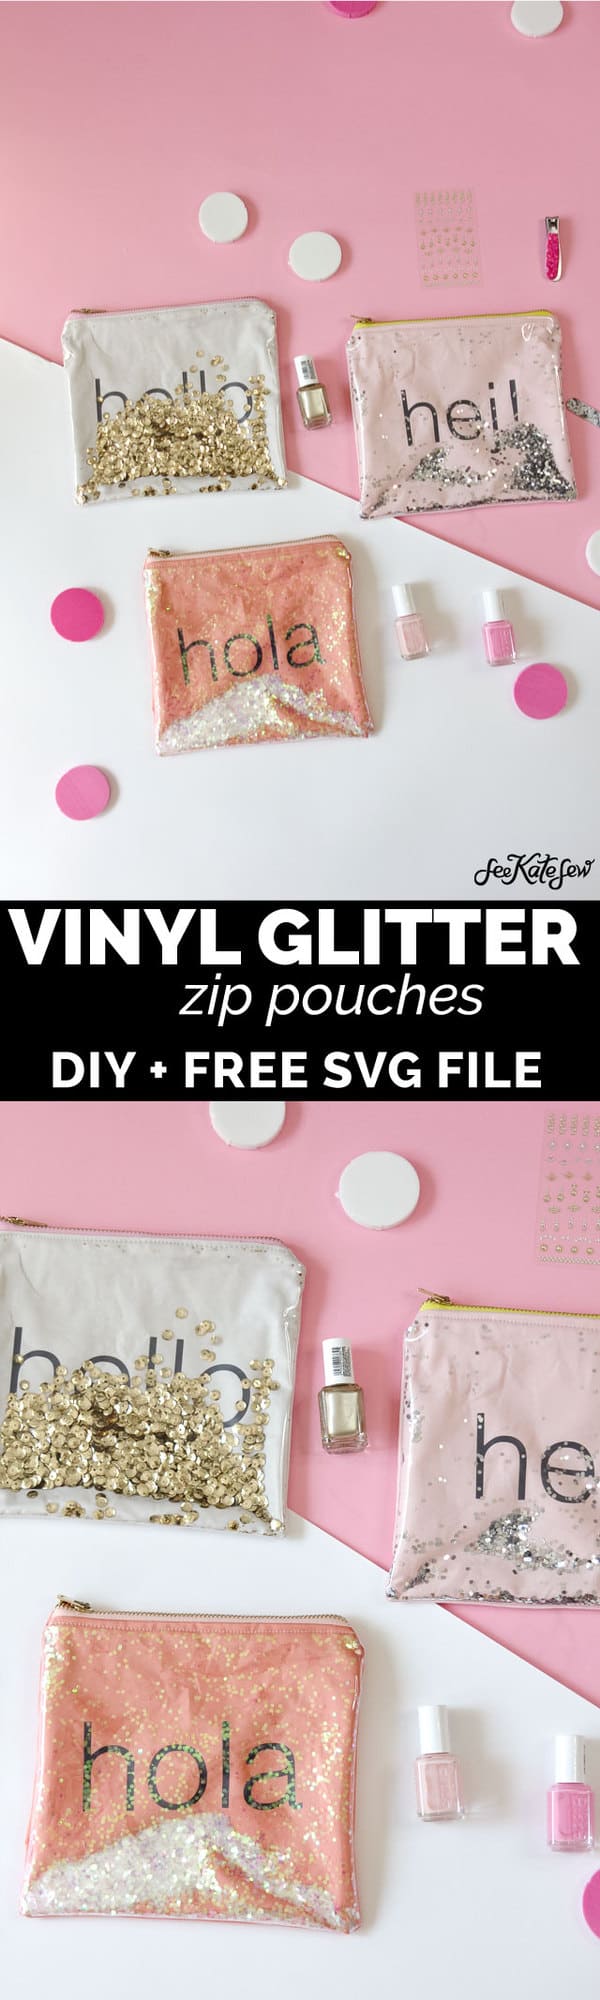 GLITTER SHAKE POUCH | diy makeup bag | diy zippered pouch | cricut projects | diy tips and tricks | diy sewing projects | sewing tips and tricks | sewing tutorials | how to make a zippered pouch || See Kate Sew #diyzipperpouch #diymakeupbag #cricutprojectideas #cricut #seekatesew